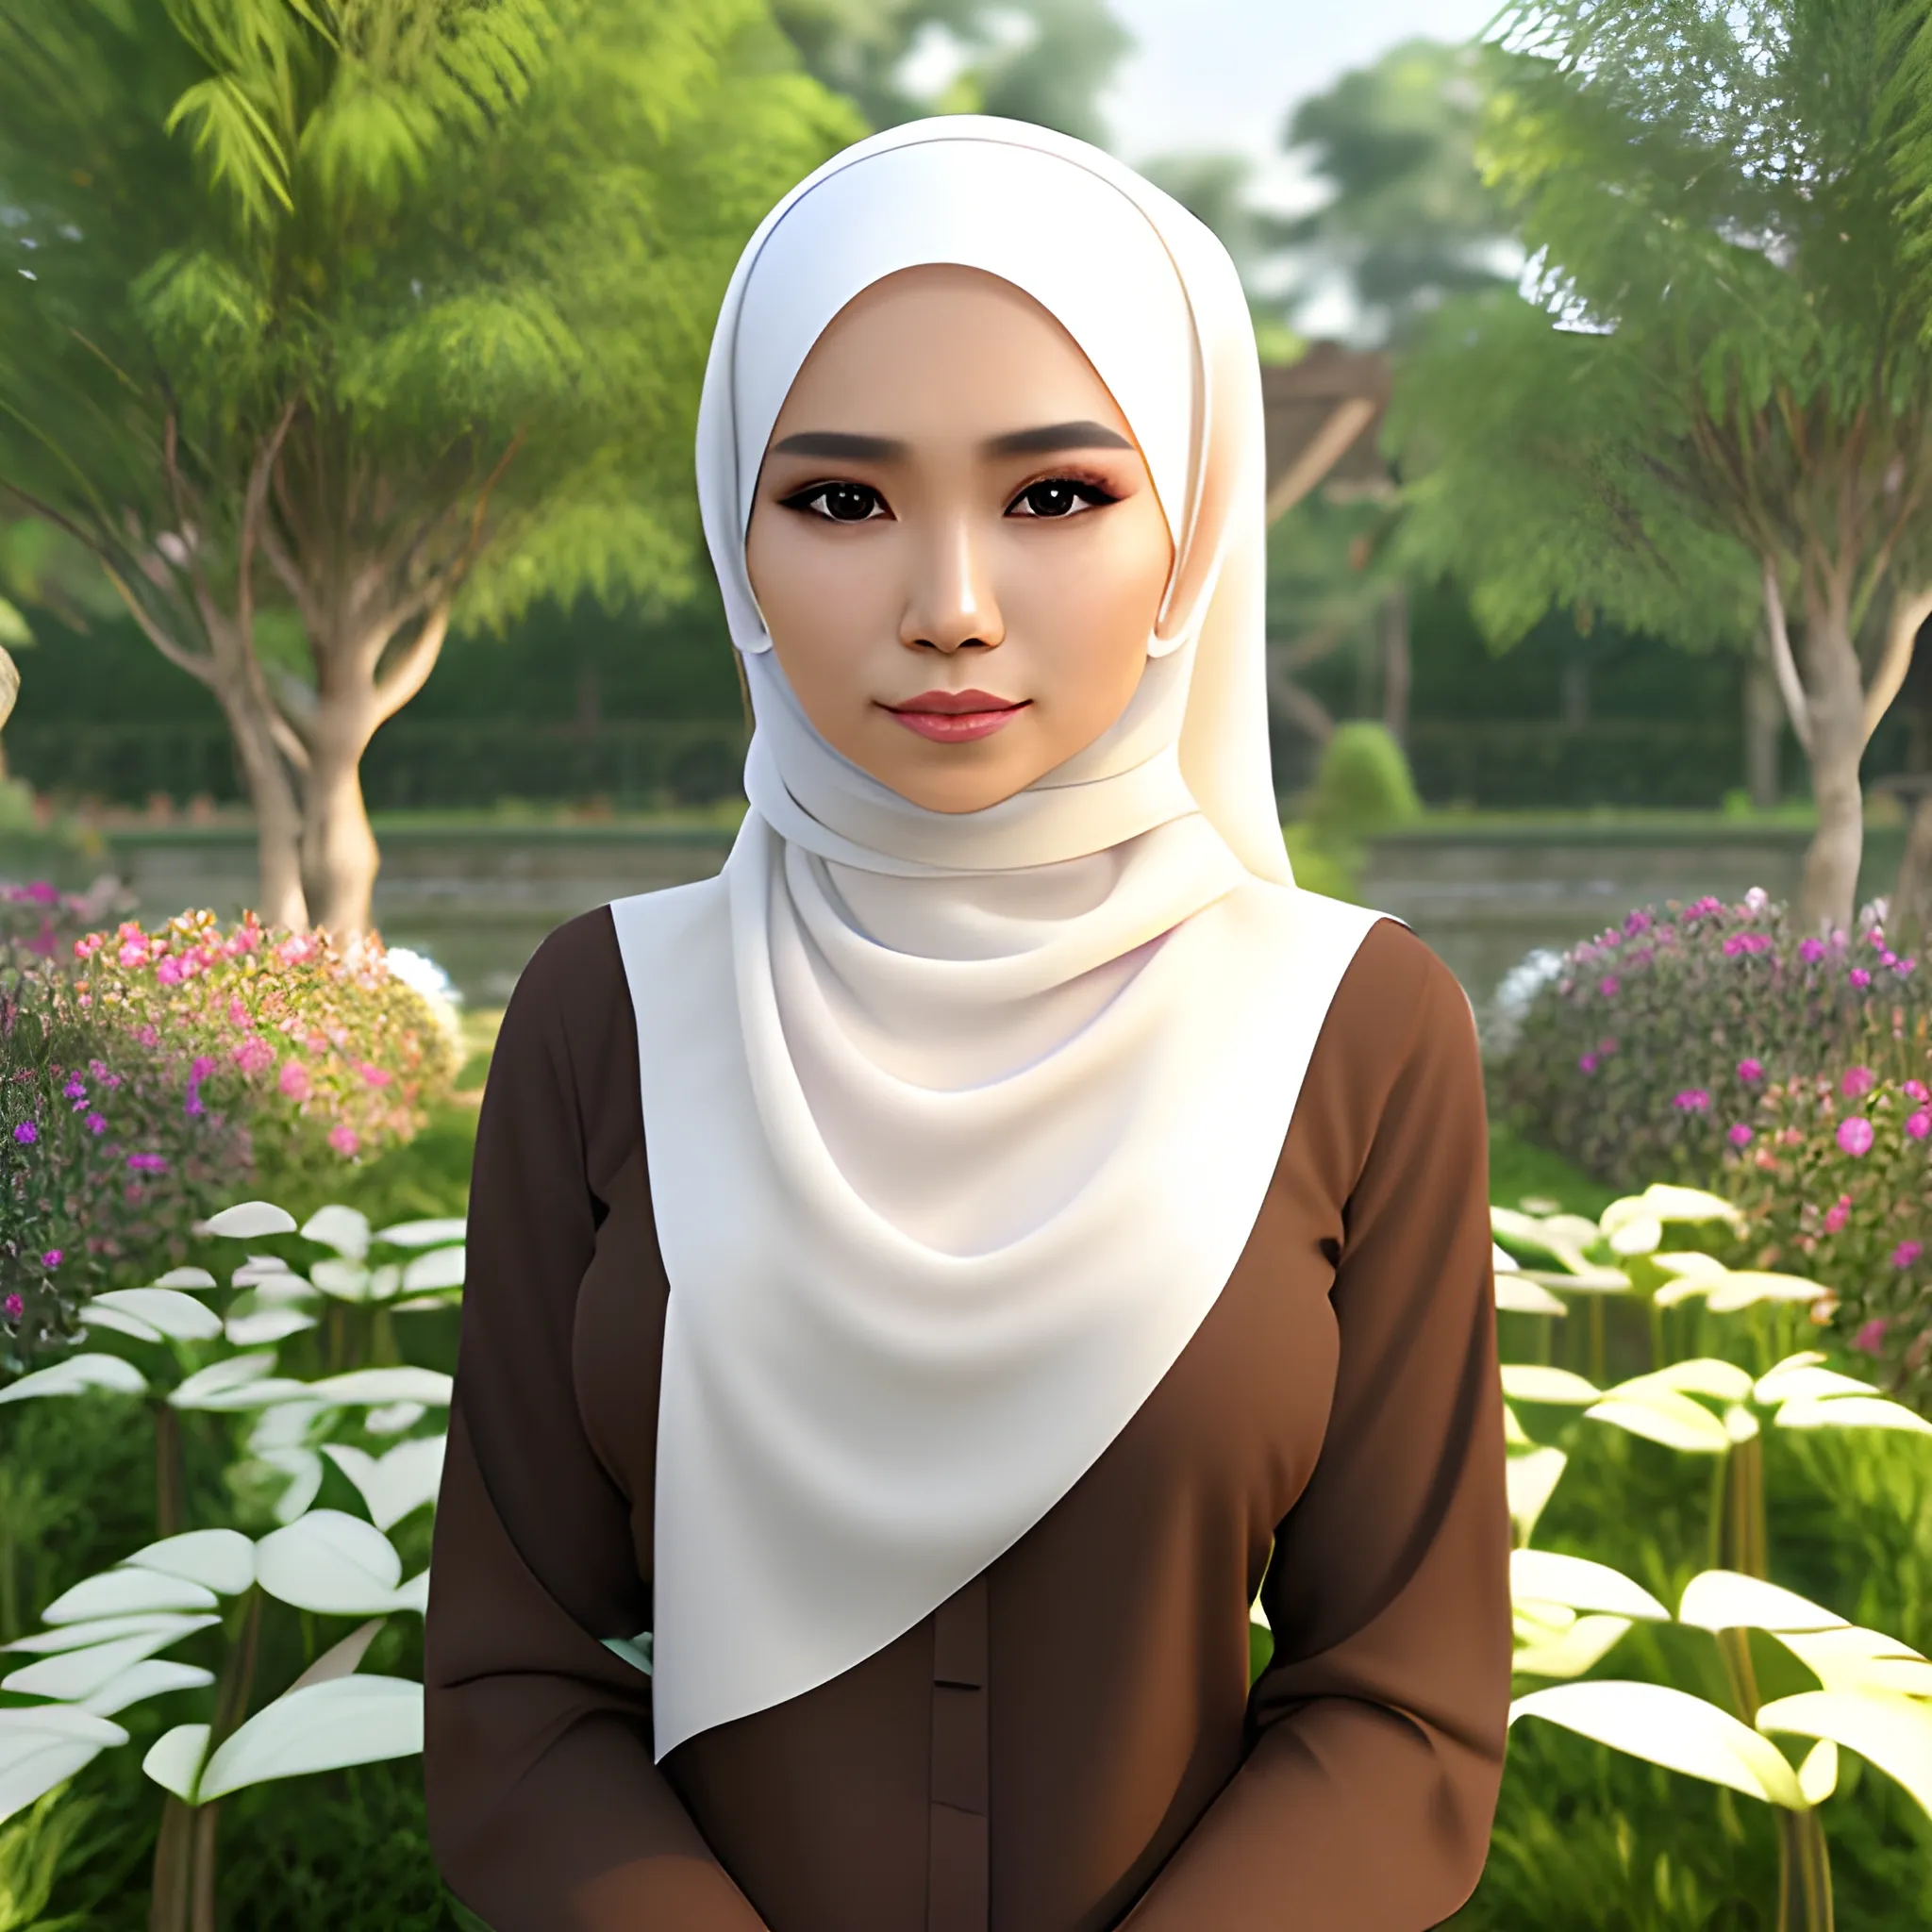 pretty women indonesian, elegant, wistful, face detail, sharp nose, black eyes by tear, wearing a brown hijab, white blouse, casual, in the garden, her eyes looking at camera, 4k, 3D